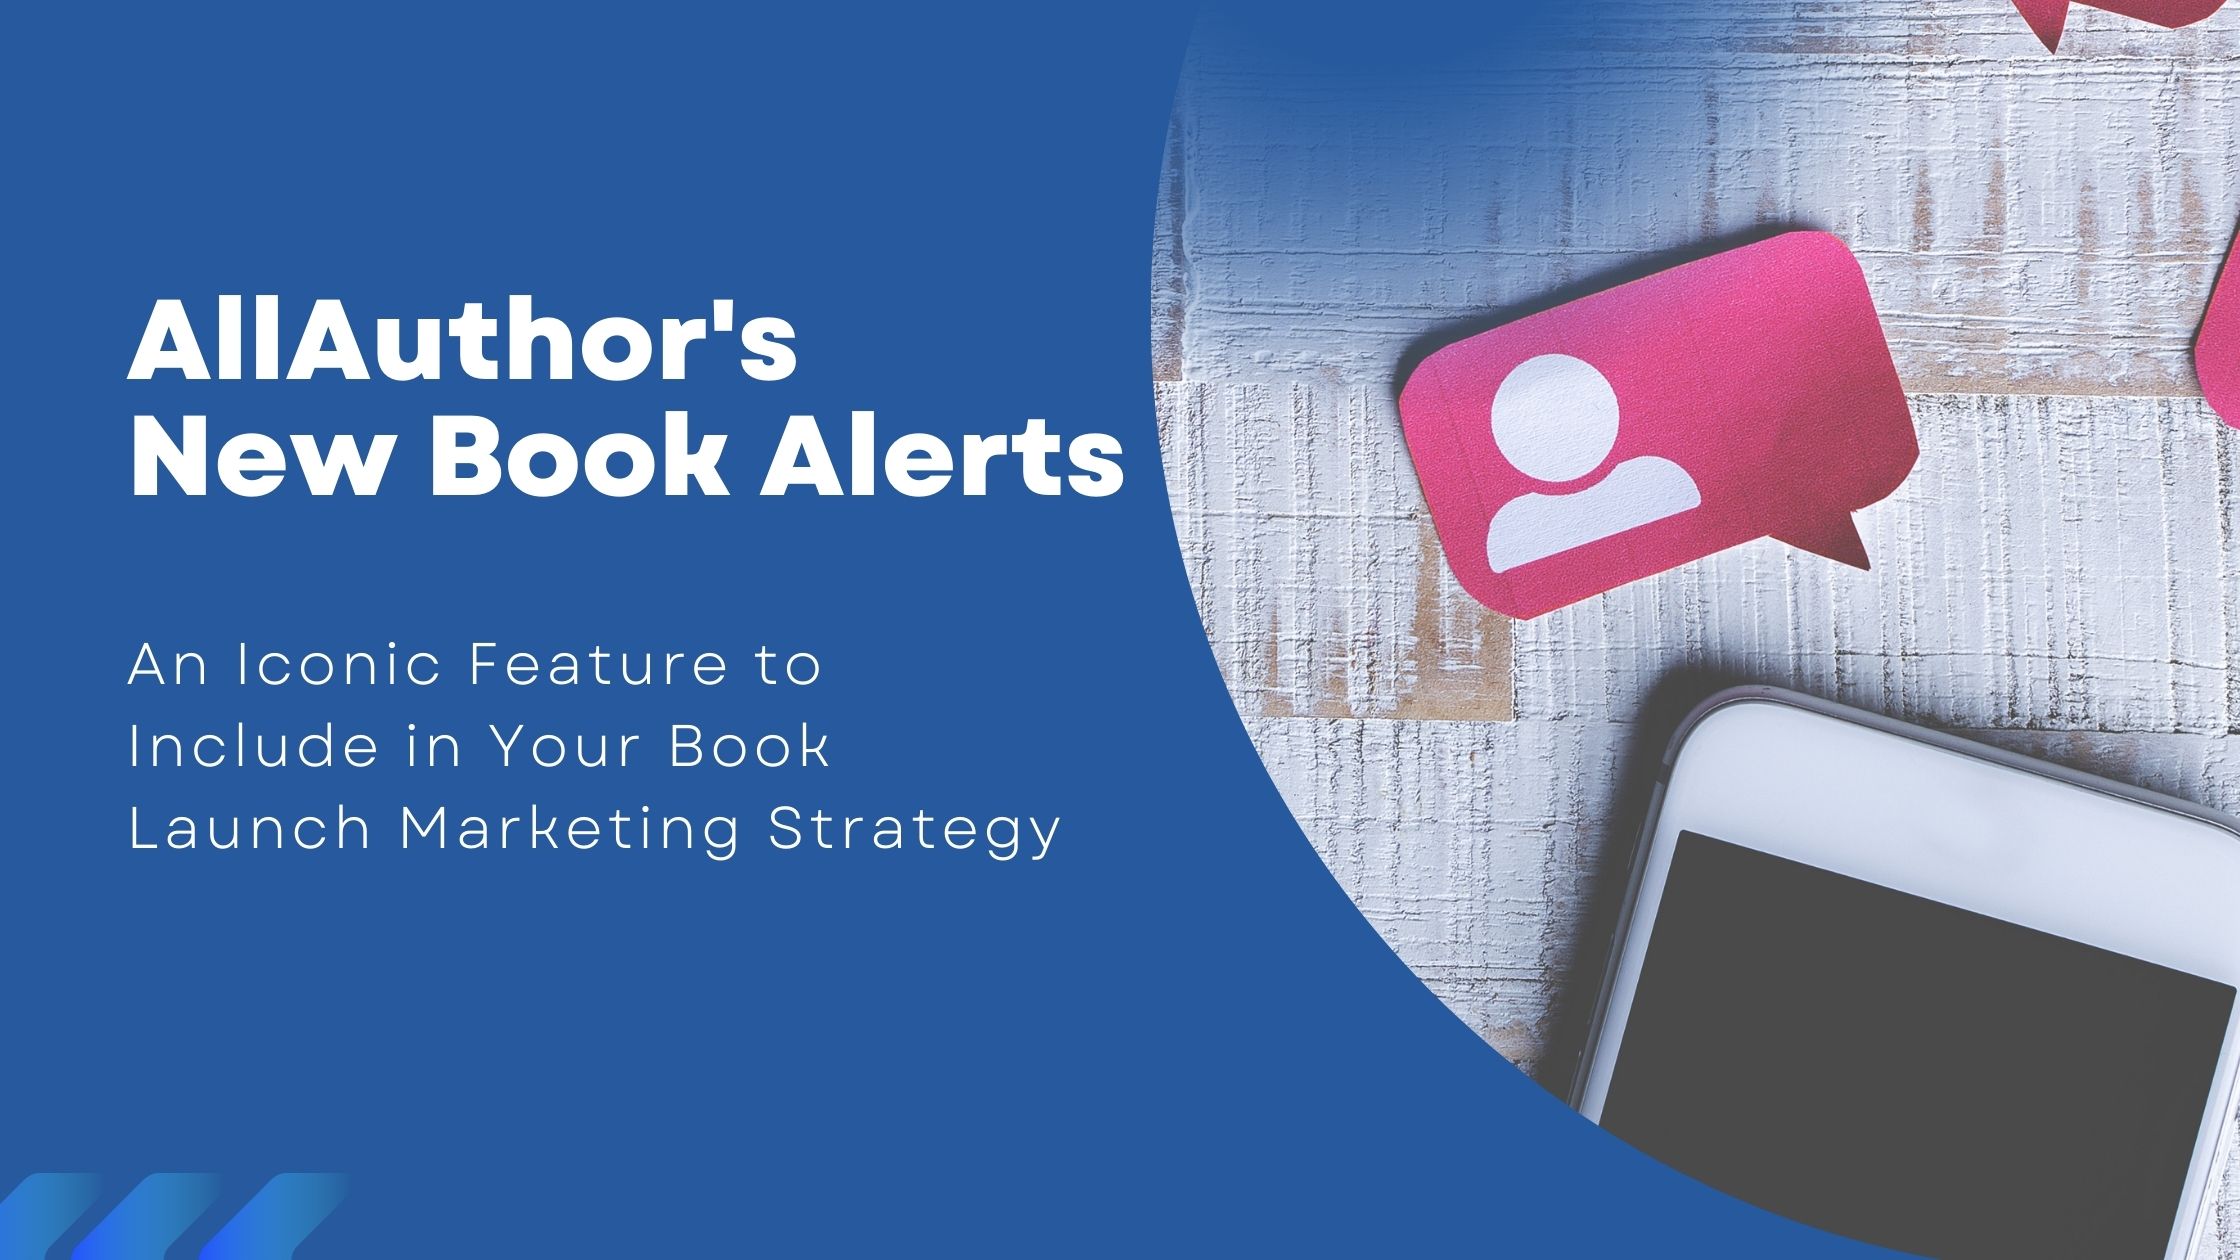 – An Iconic Feature to Include in Your Book Launch Marketing Strategy